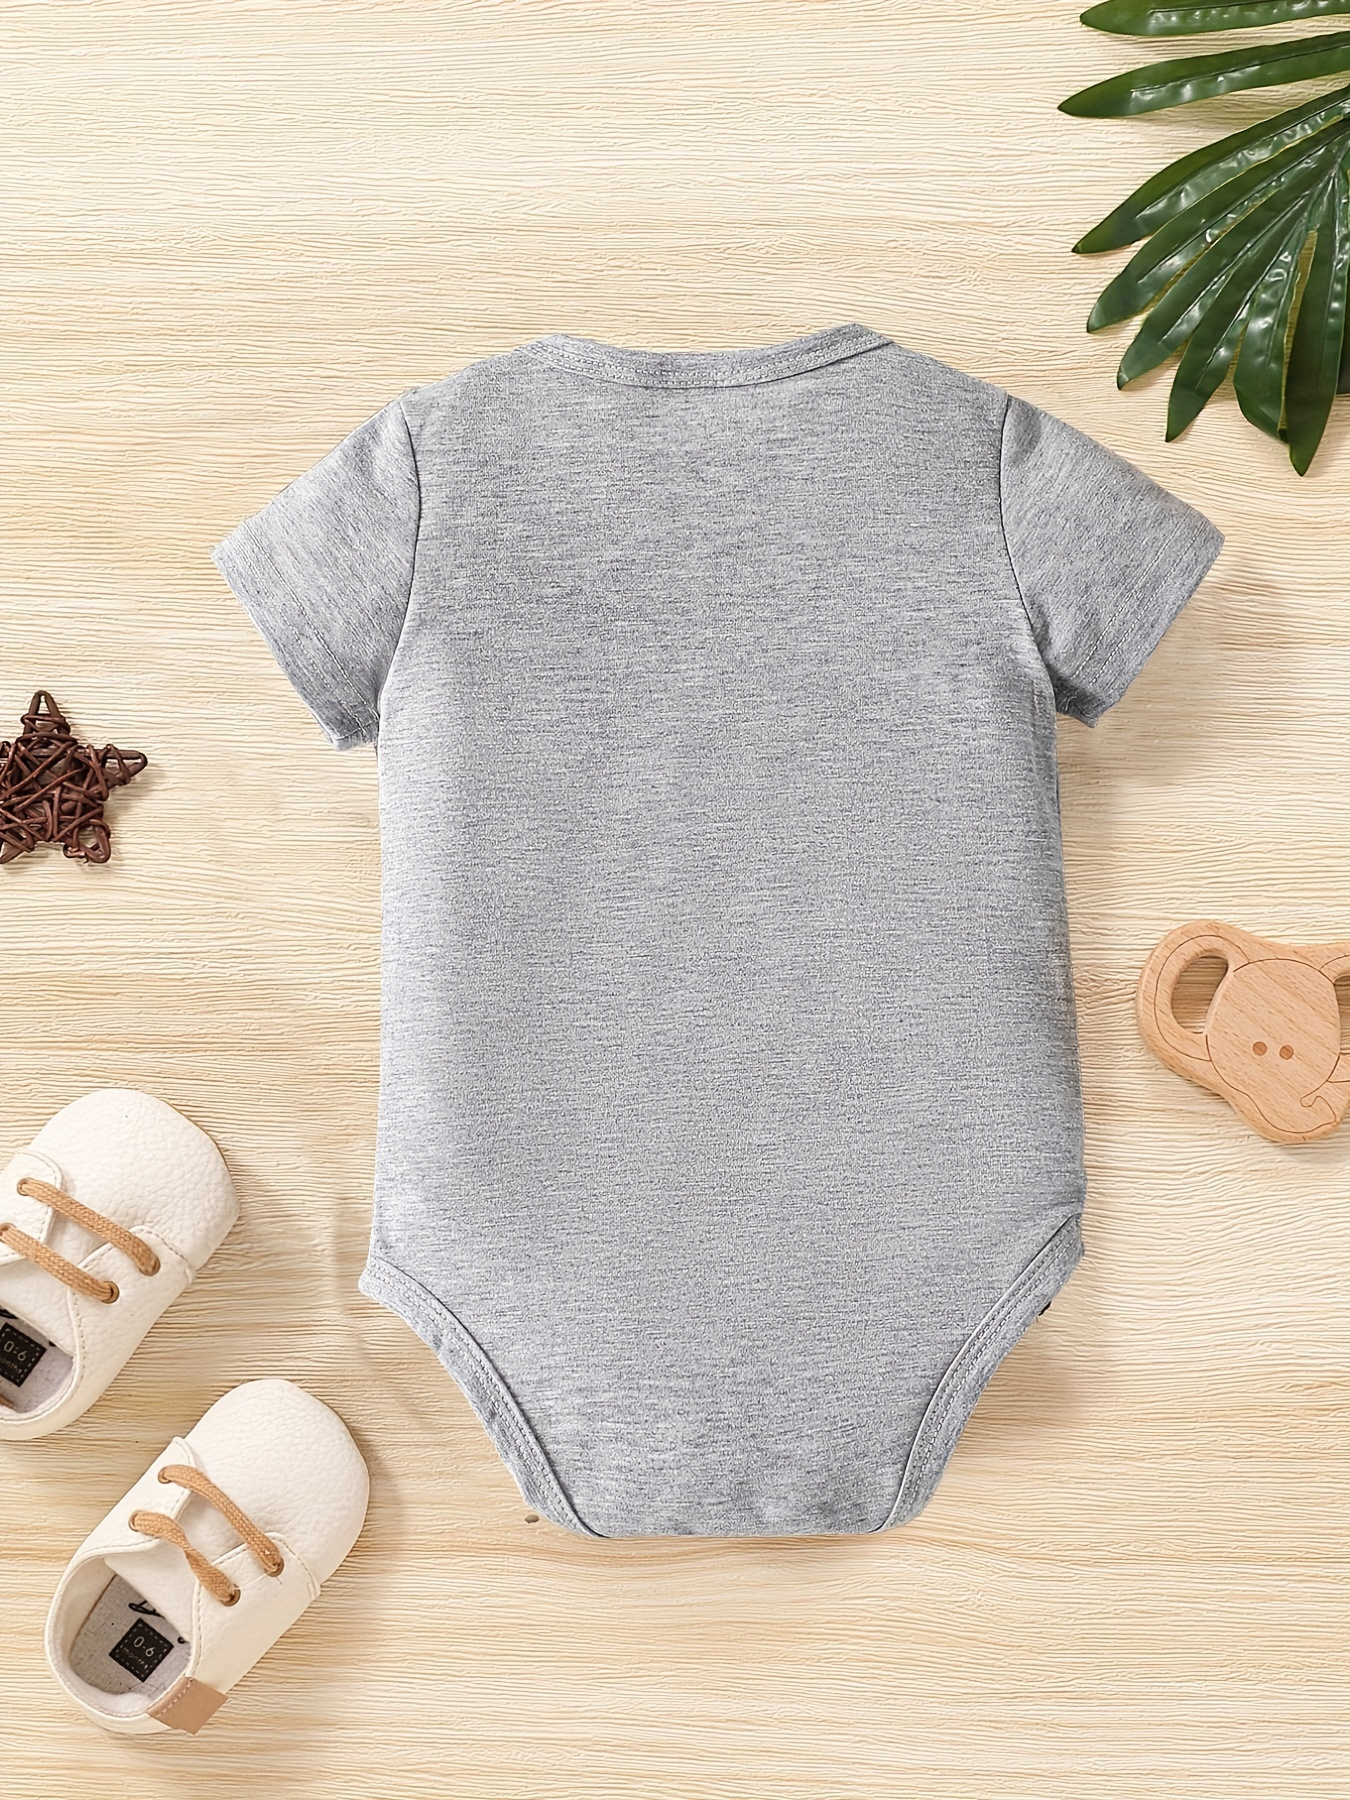 infant triangle jumpsuit with cute letter print short sleeved romper sleepwear 5 things you should know about my grandma details 1